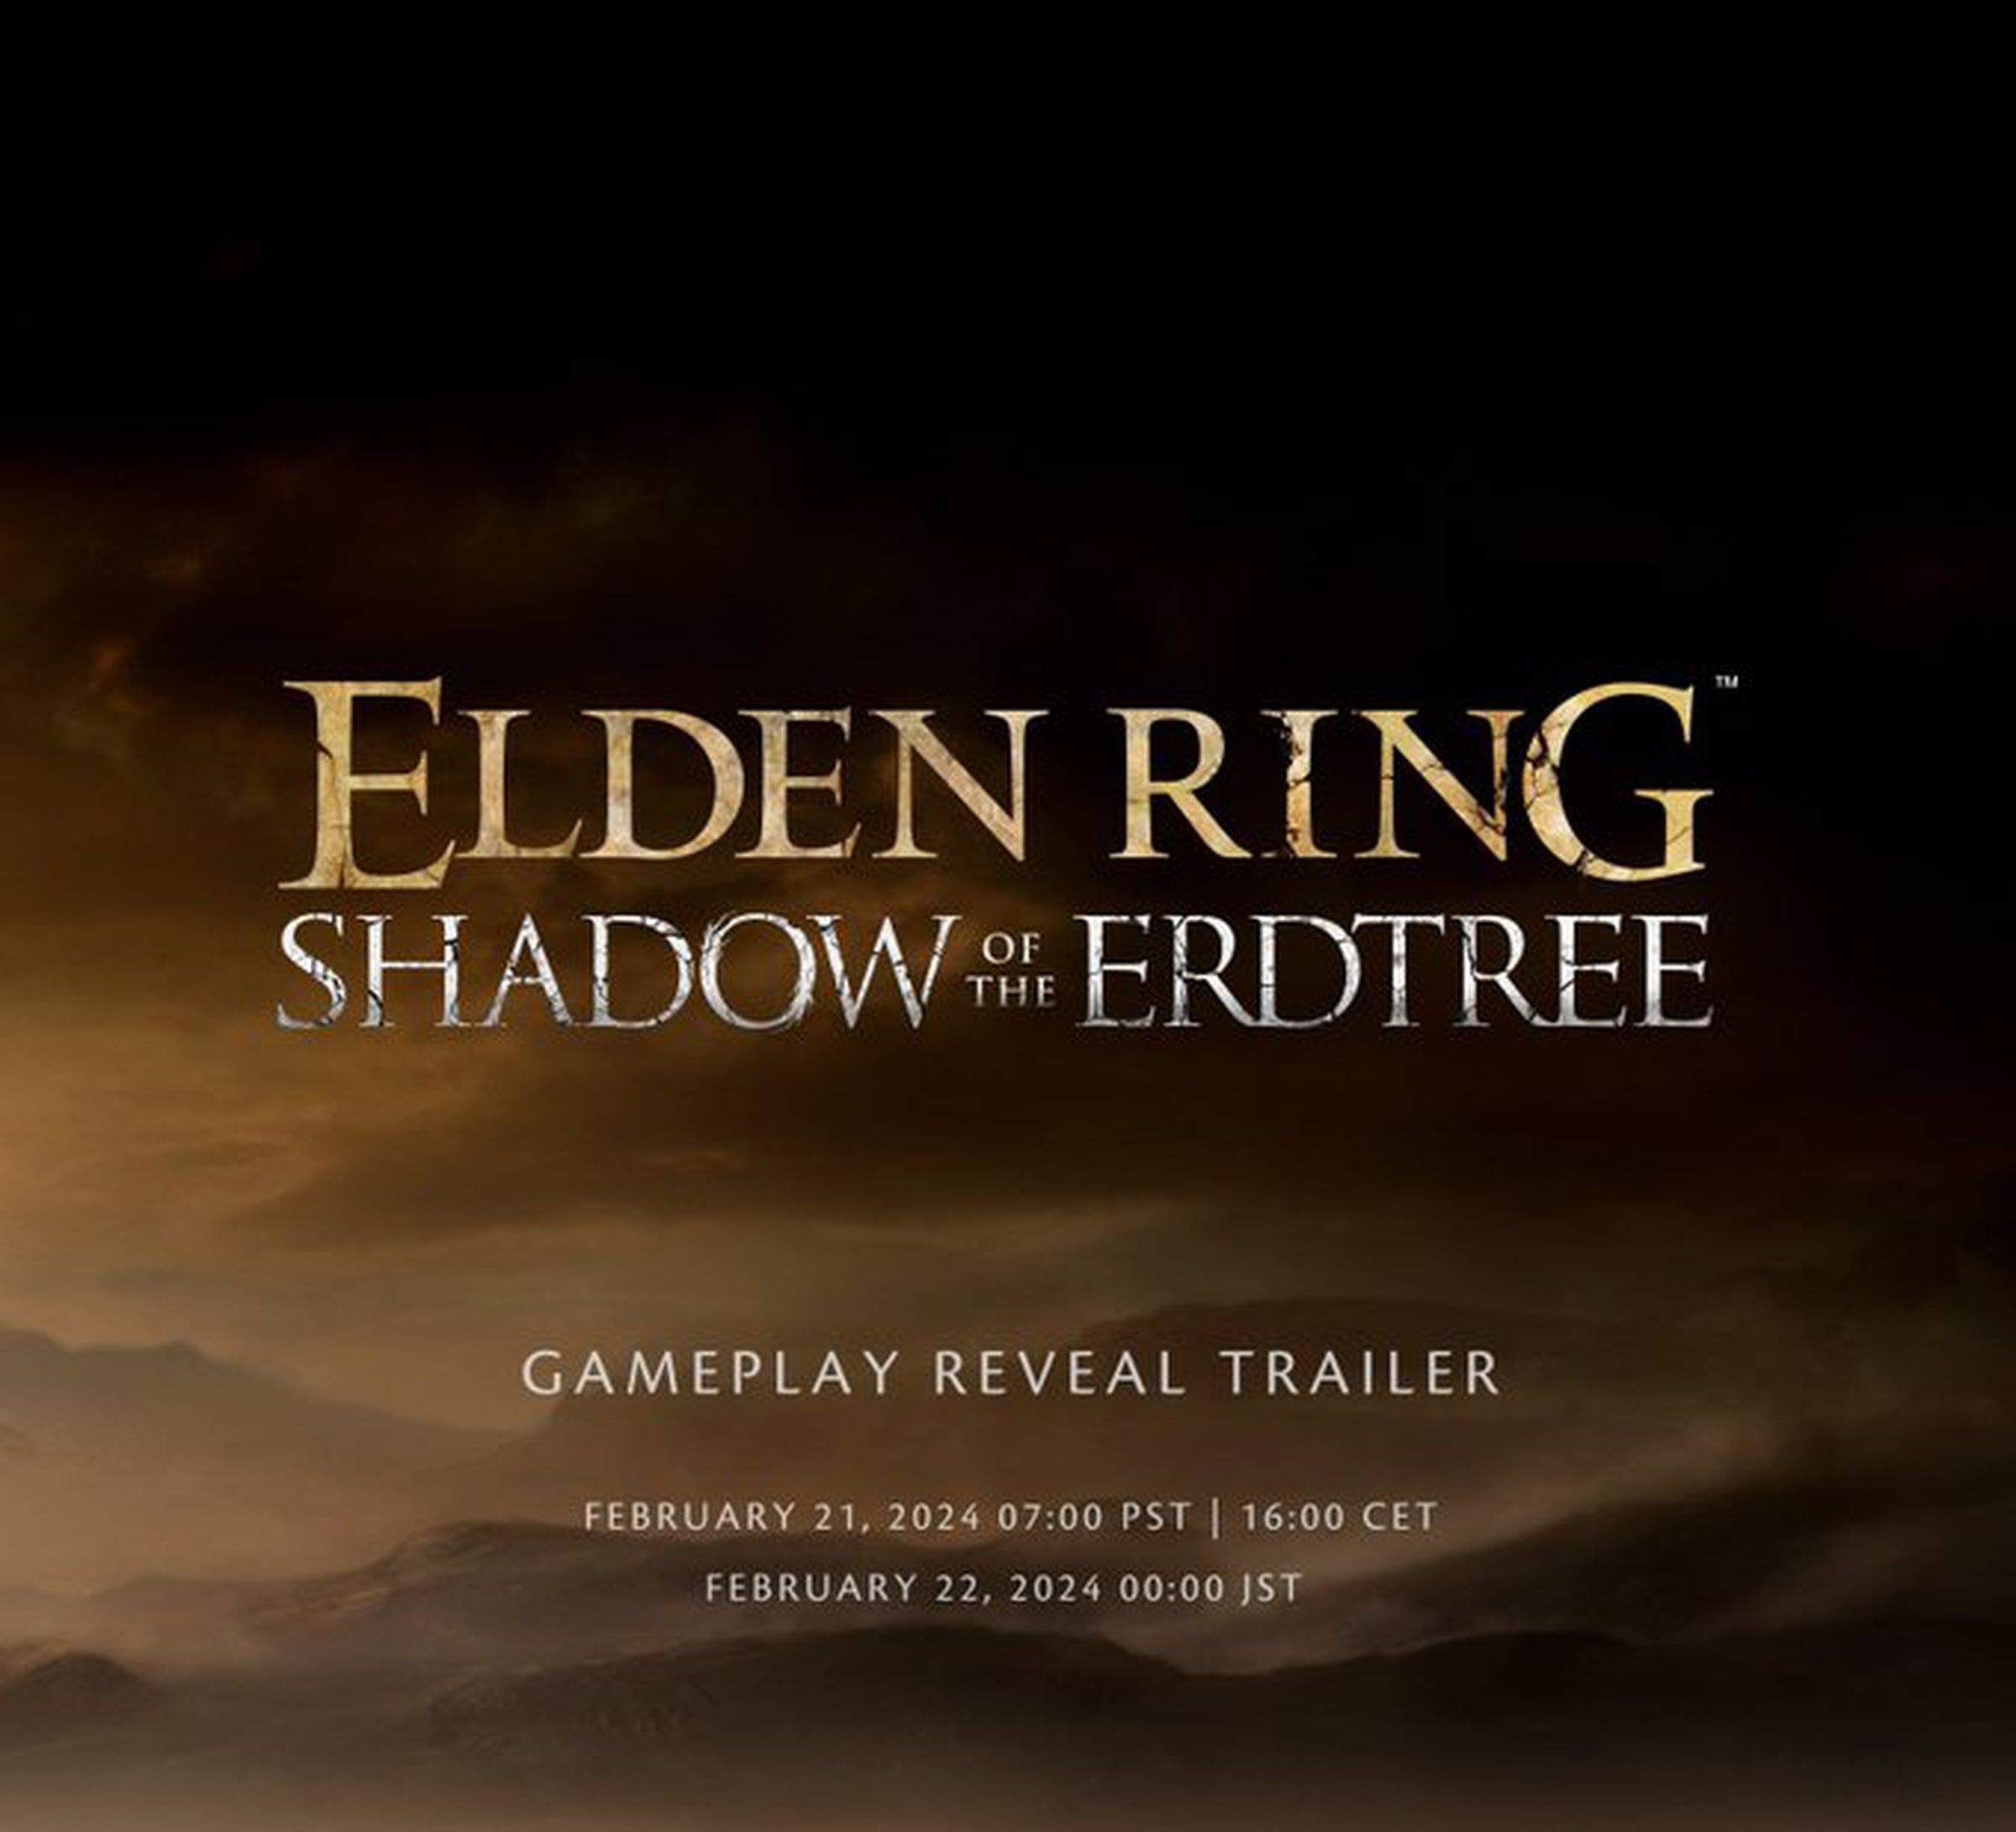 Image with the Shadow of the Erdtree trailer reveal date and time.